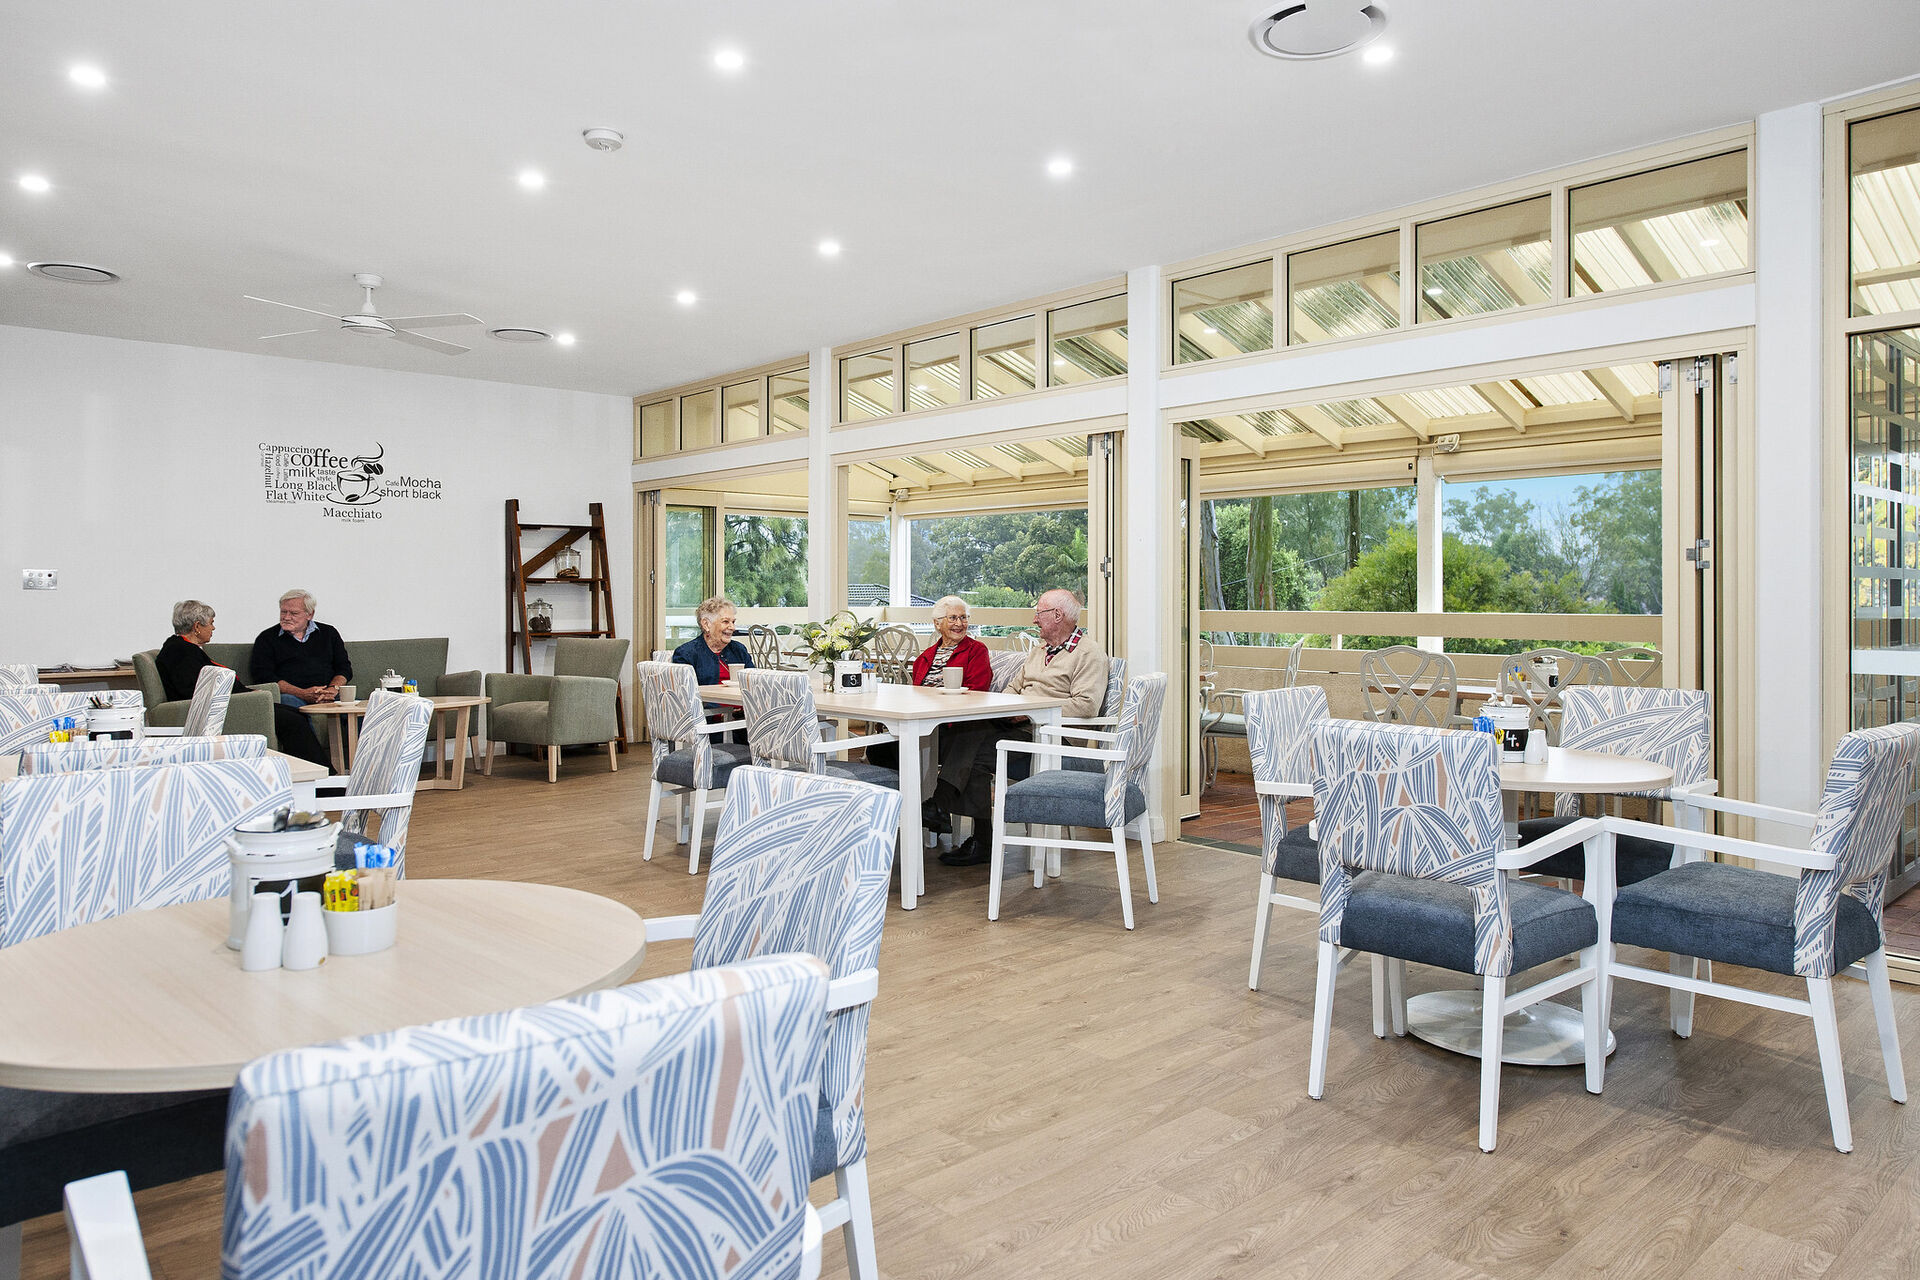 retirement village community centre with tables and chairs for residents socialising at baptistcare aminya village in baulkham hills enabling over 55s to downsize